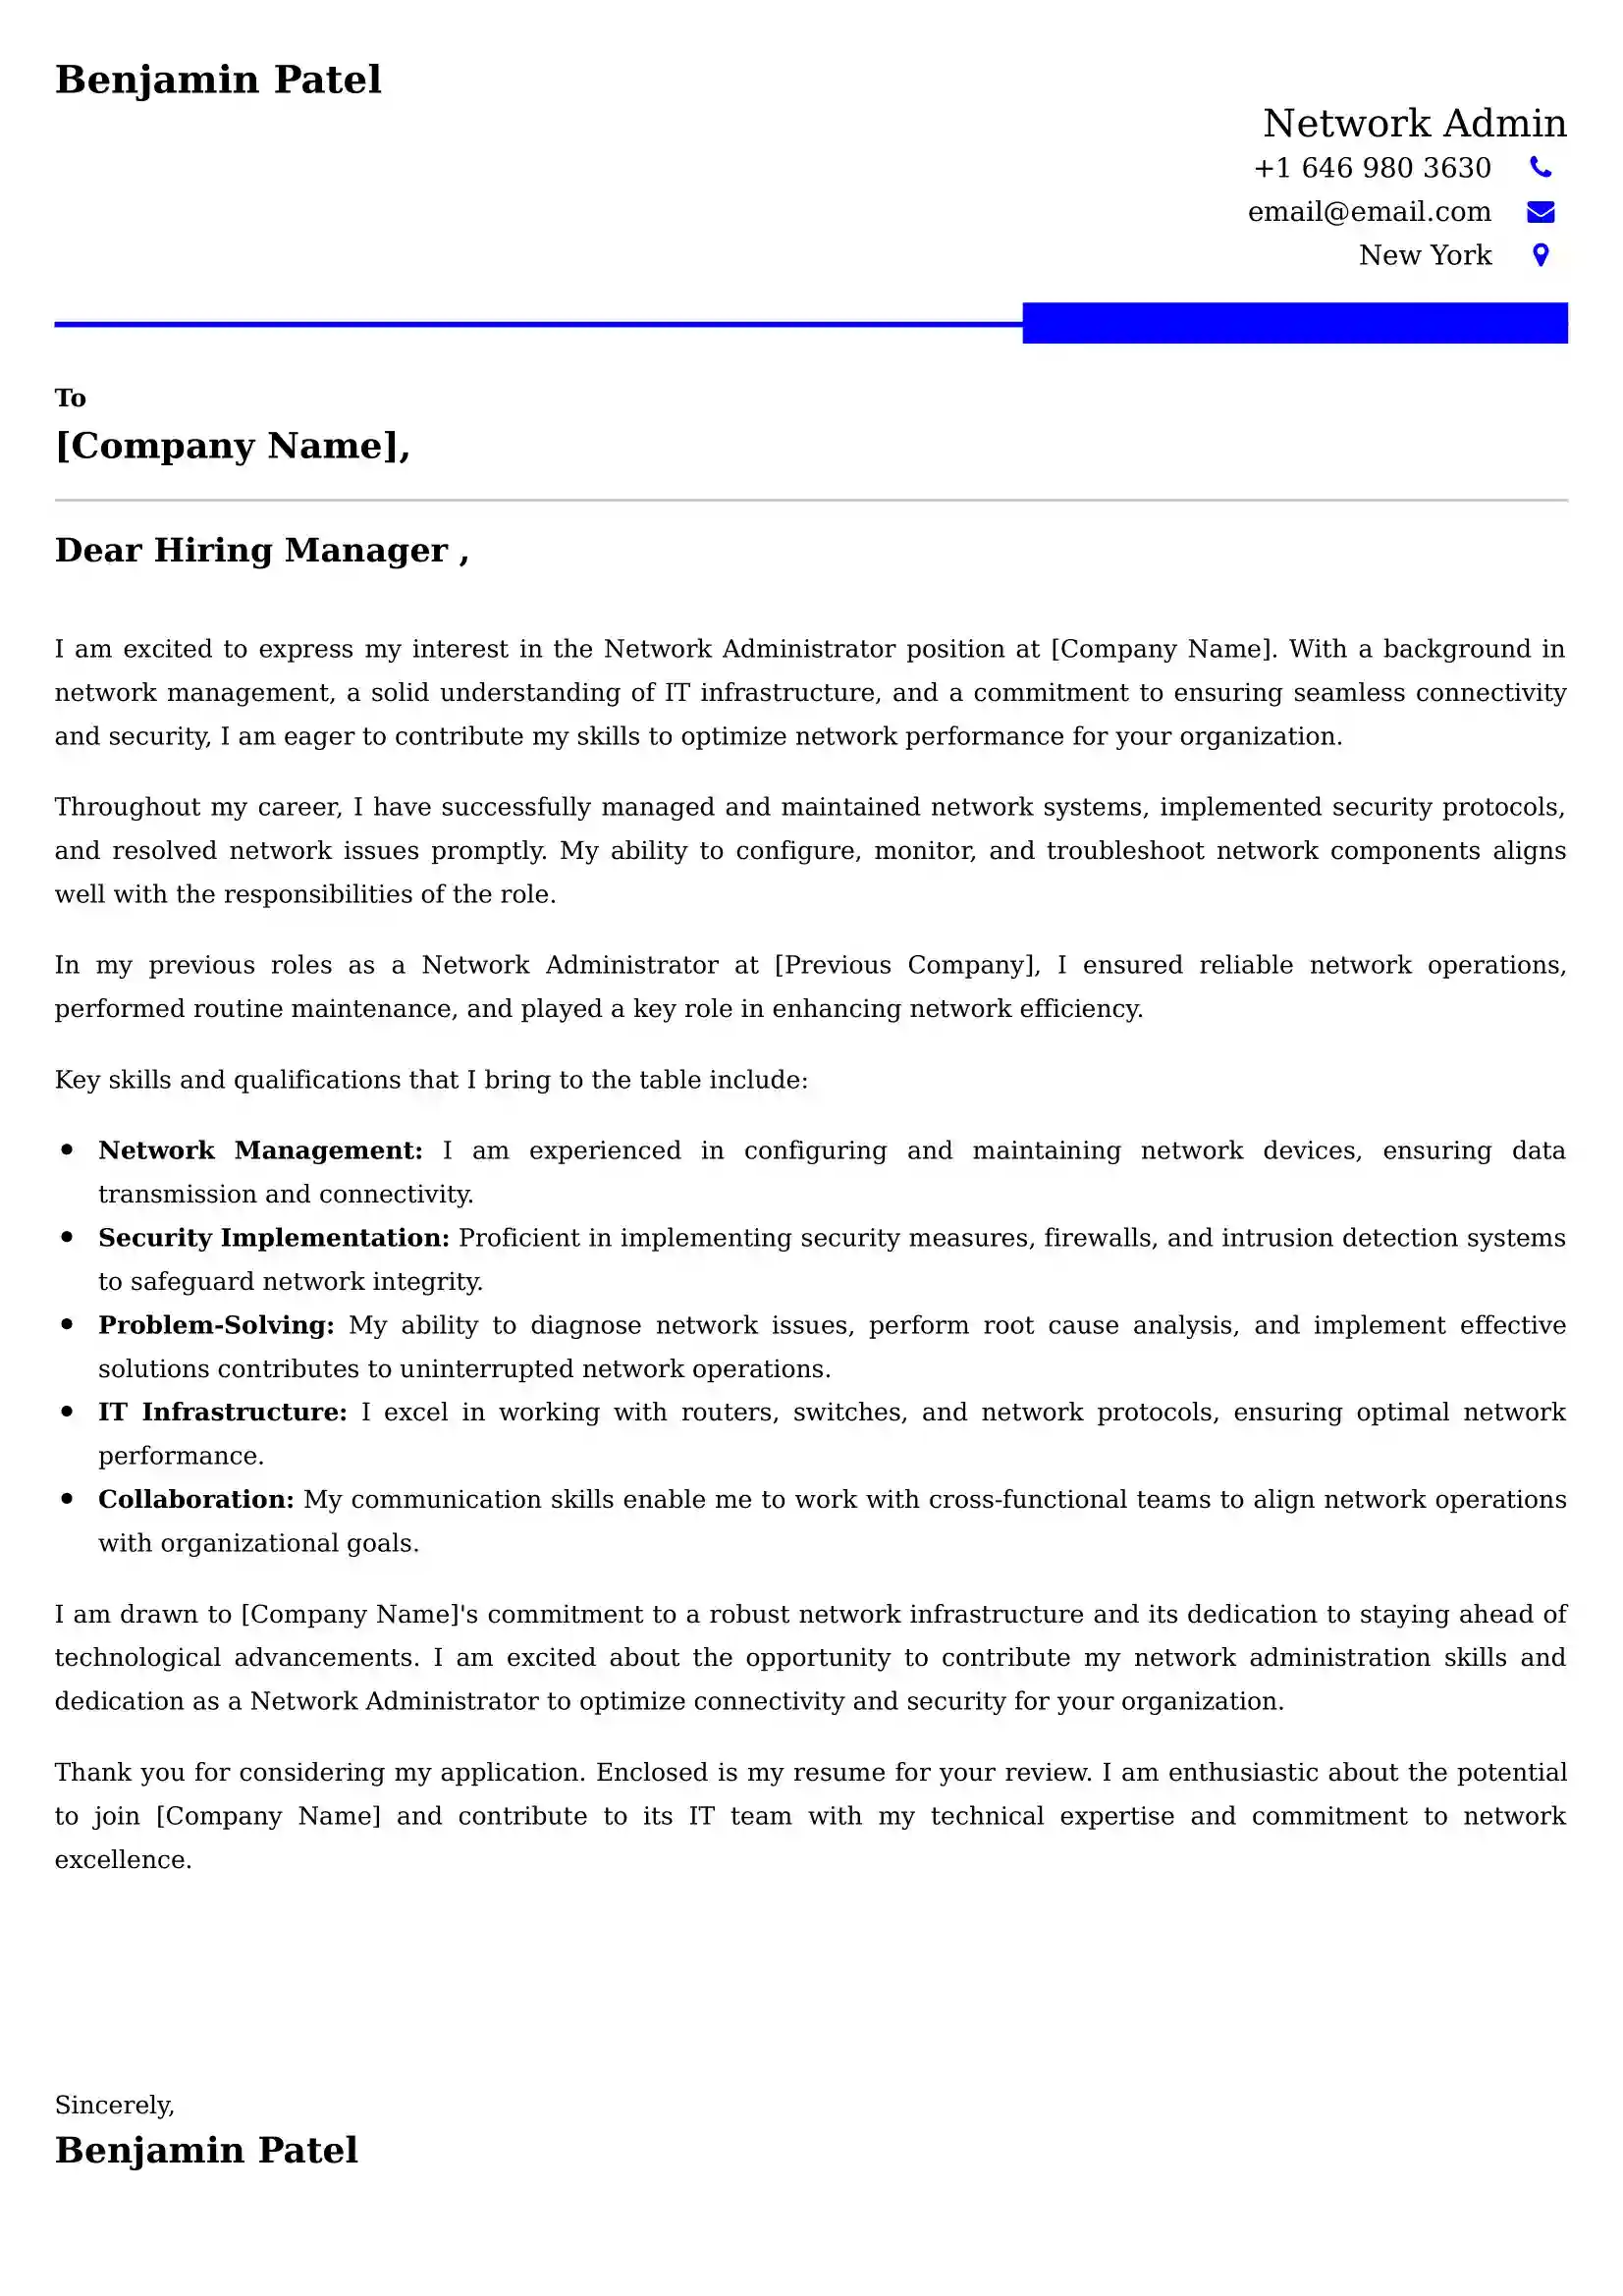 Network Admin Cover Letter Examples - Latest UK Format